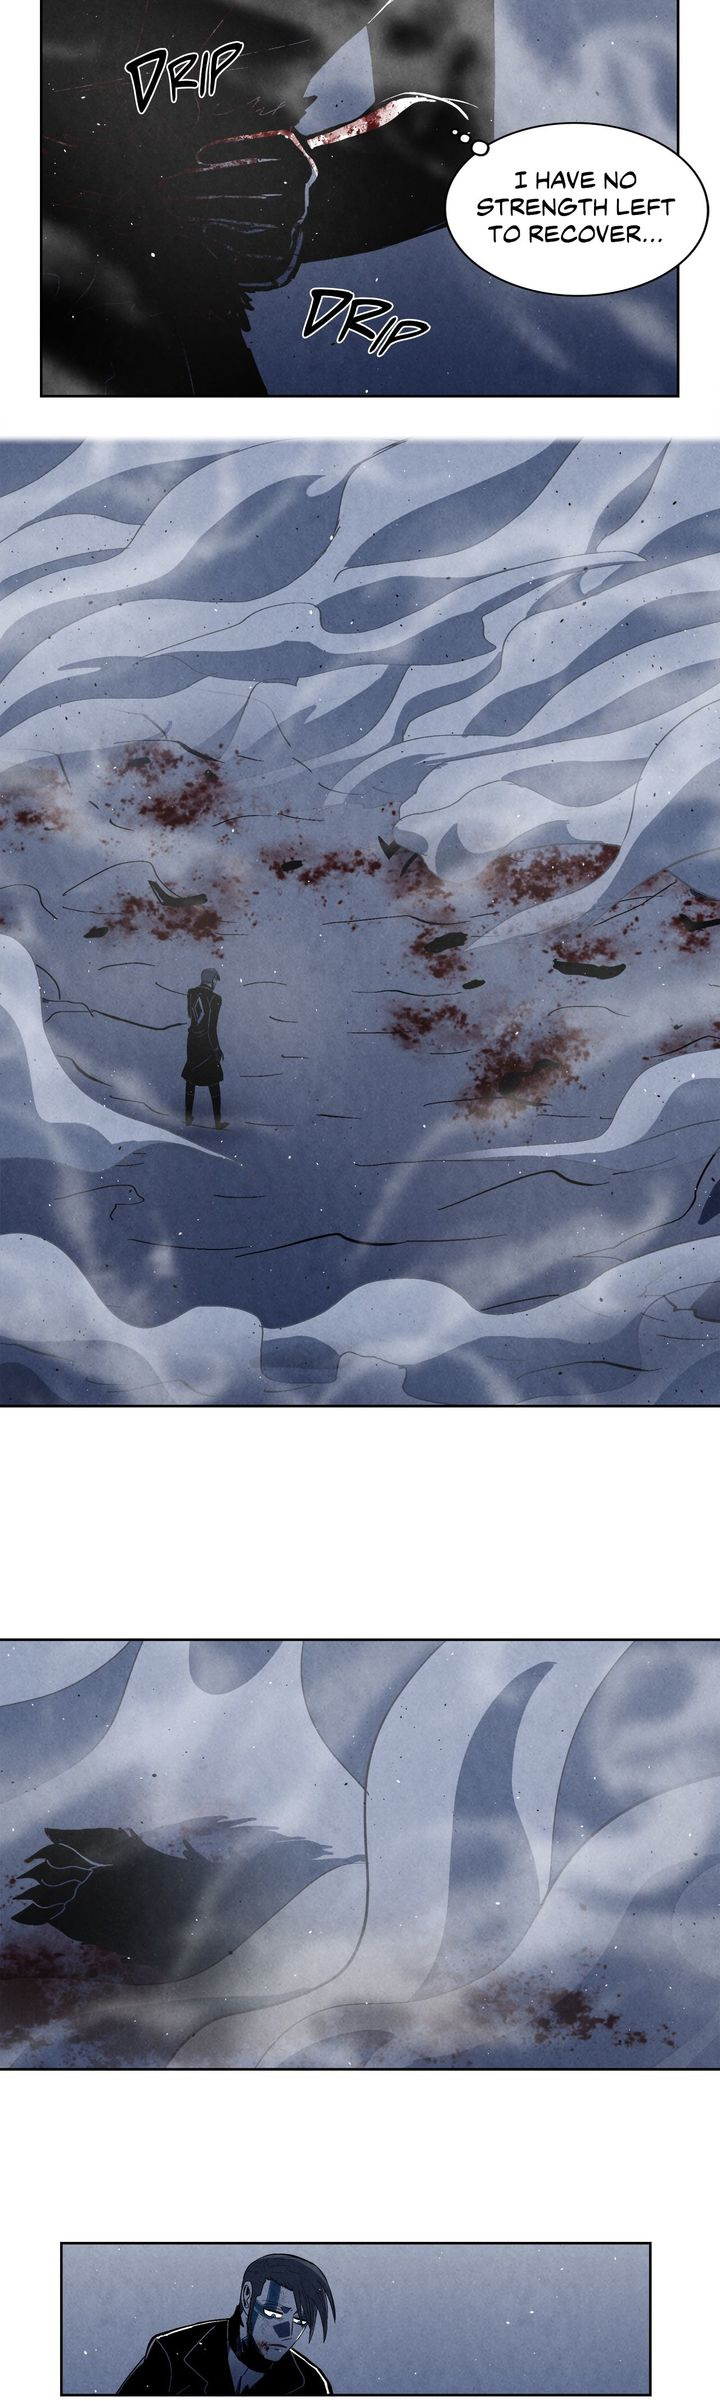 The Ashen Snowfield image